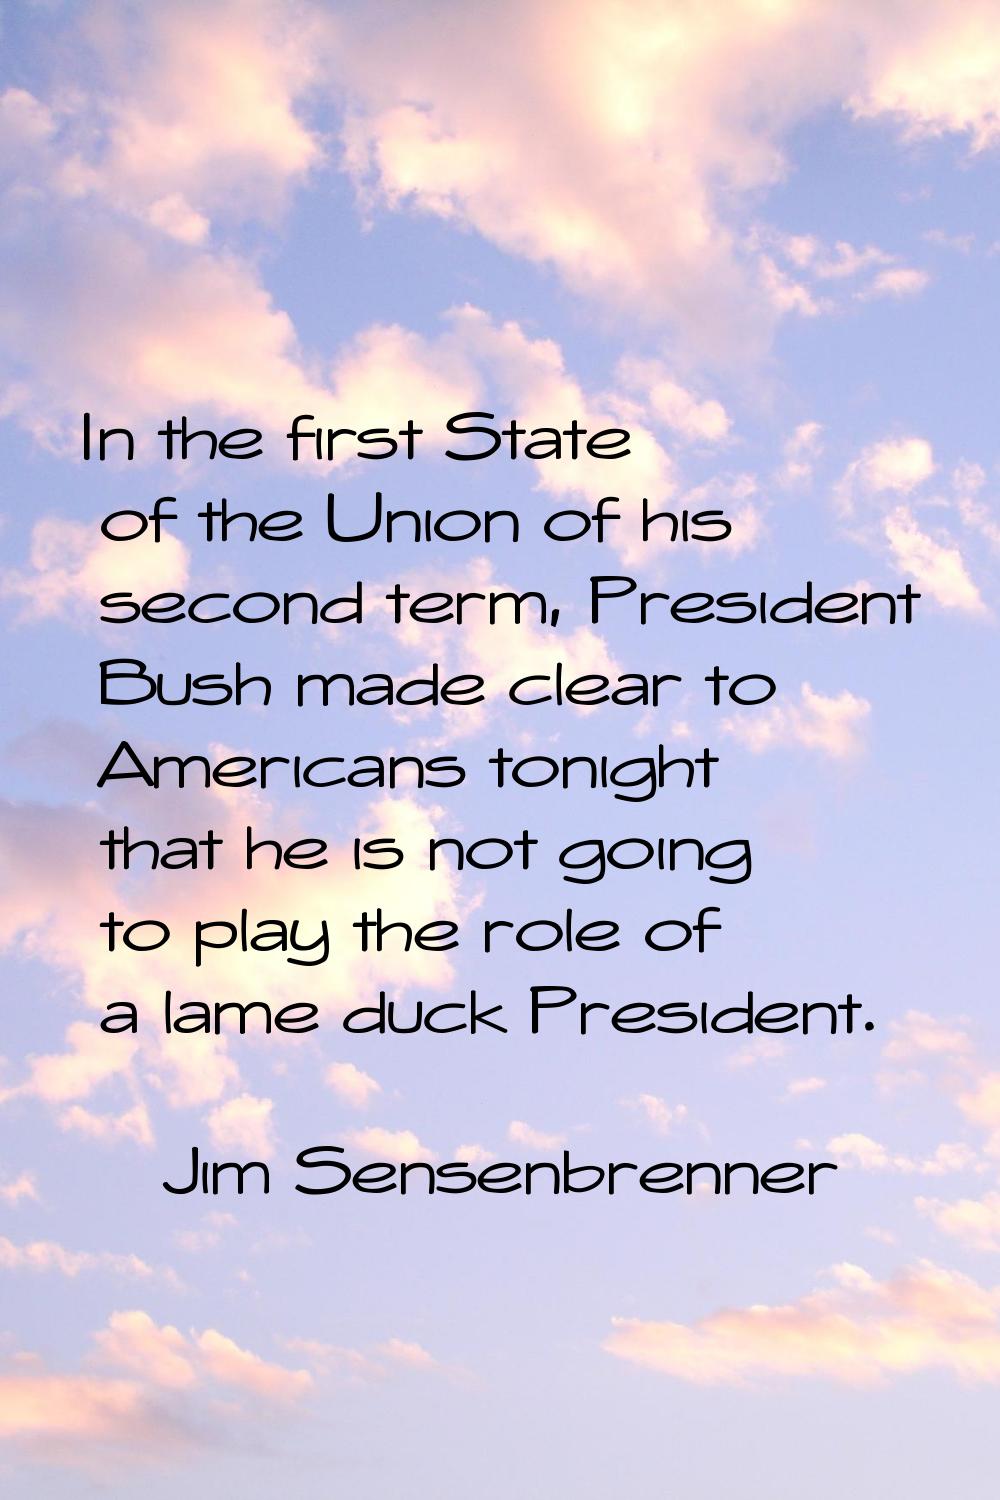 In the first State of the Union of his second term, President Bush made clear to Americans tonight 